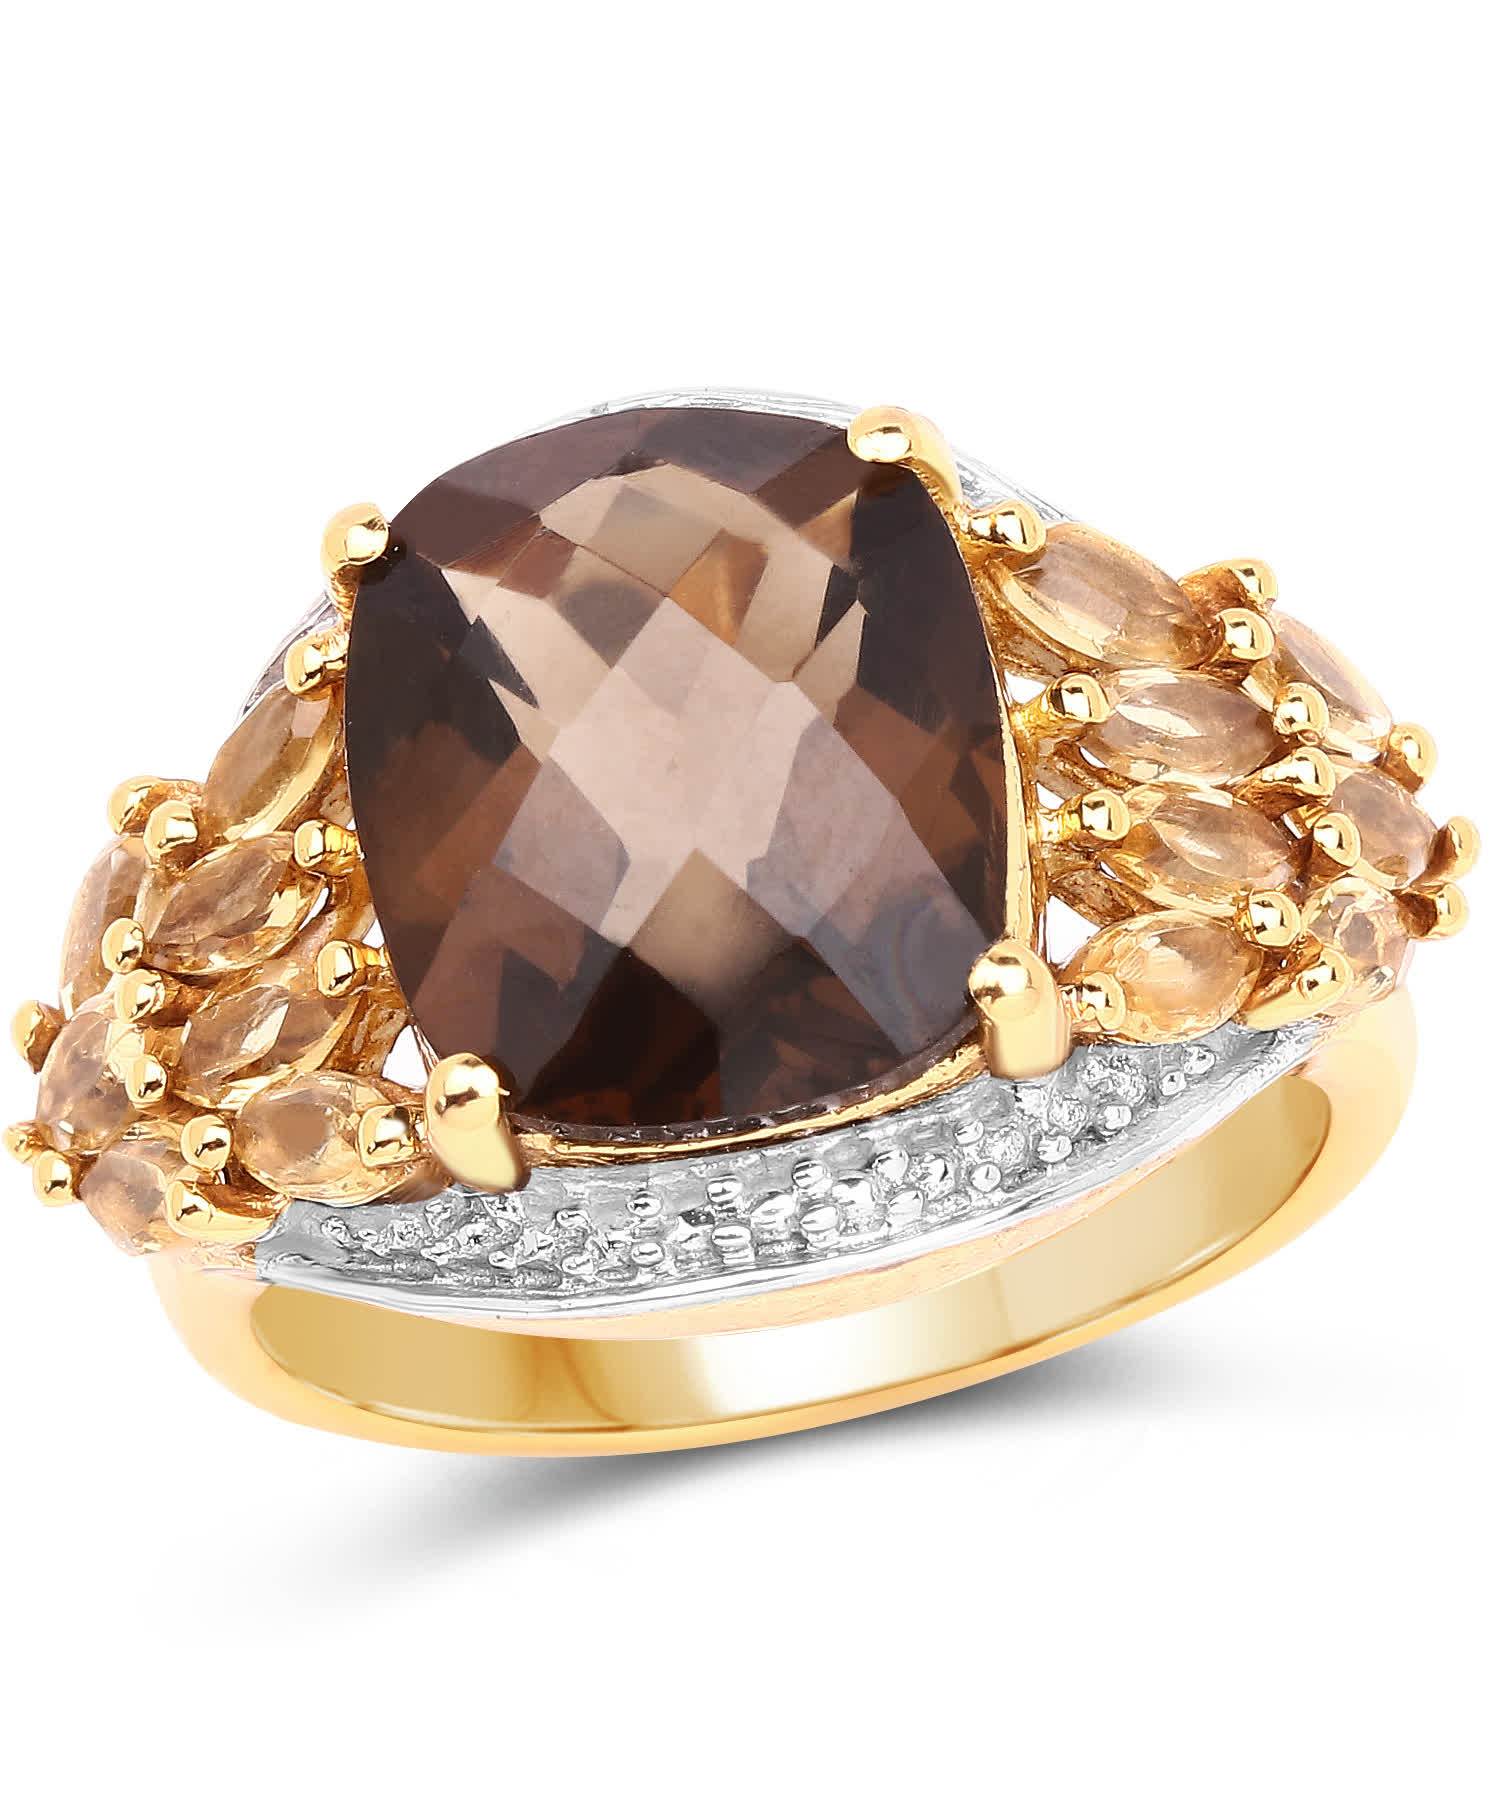 5.44ctw Natural Smoky Quartz and Honey Citrine 14k Gold Plated Cocktail Ring View 1